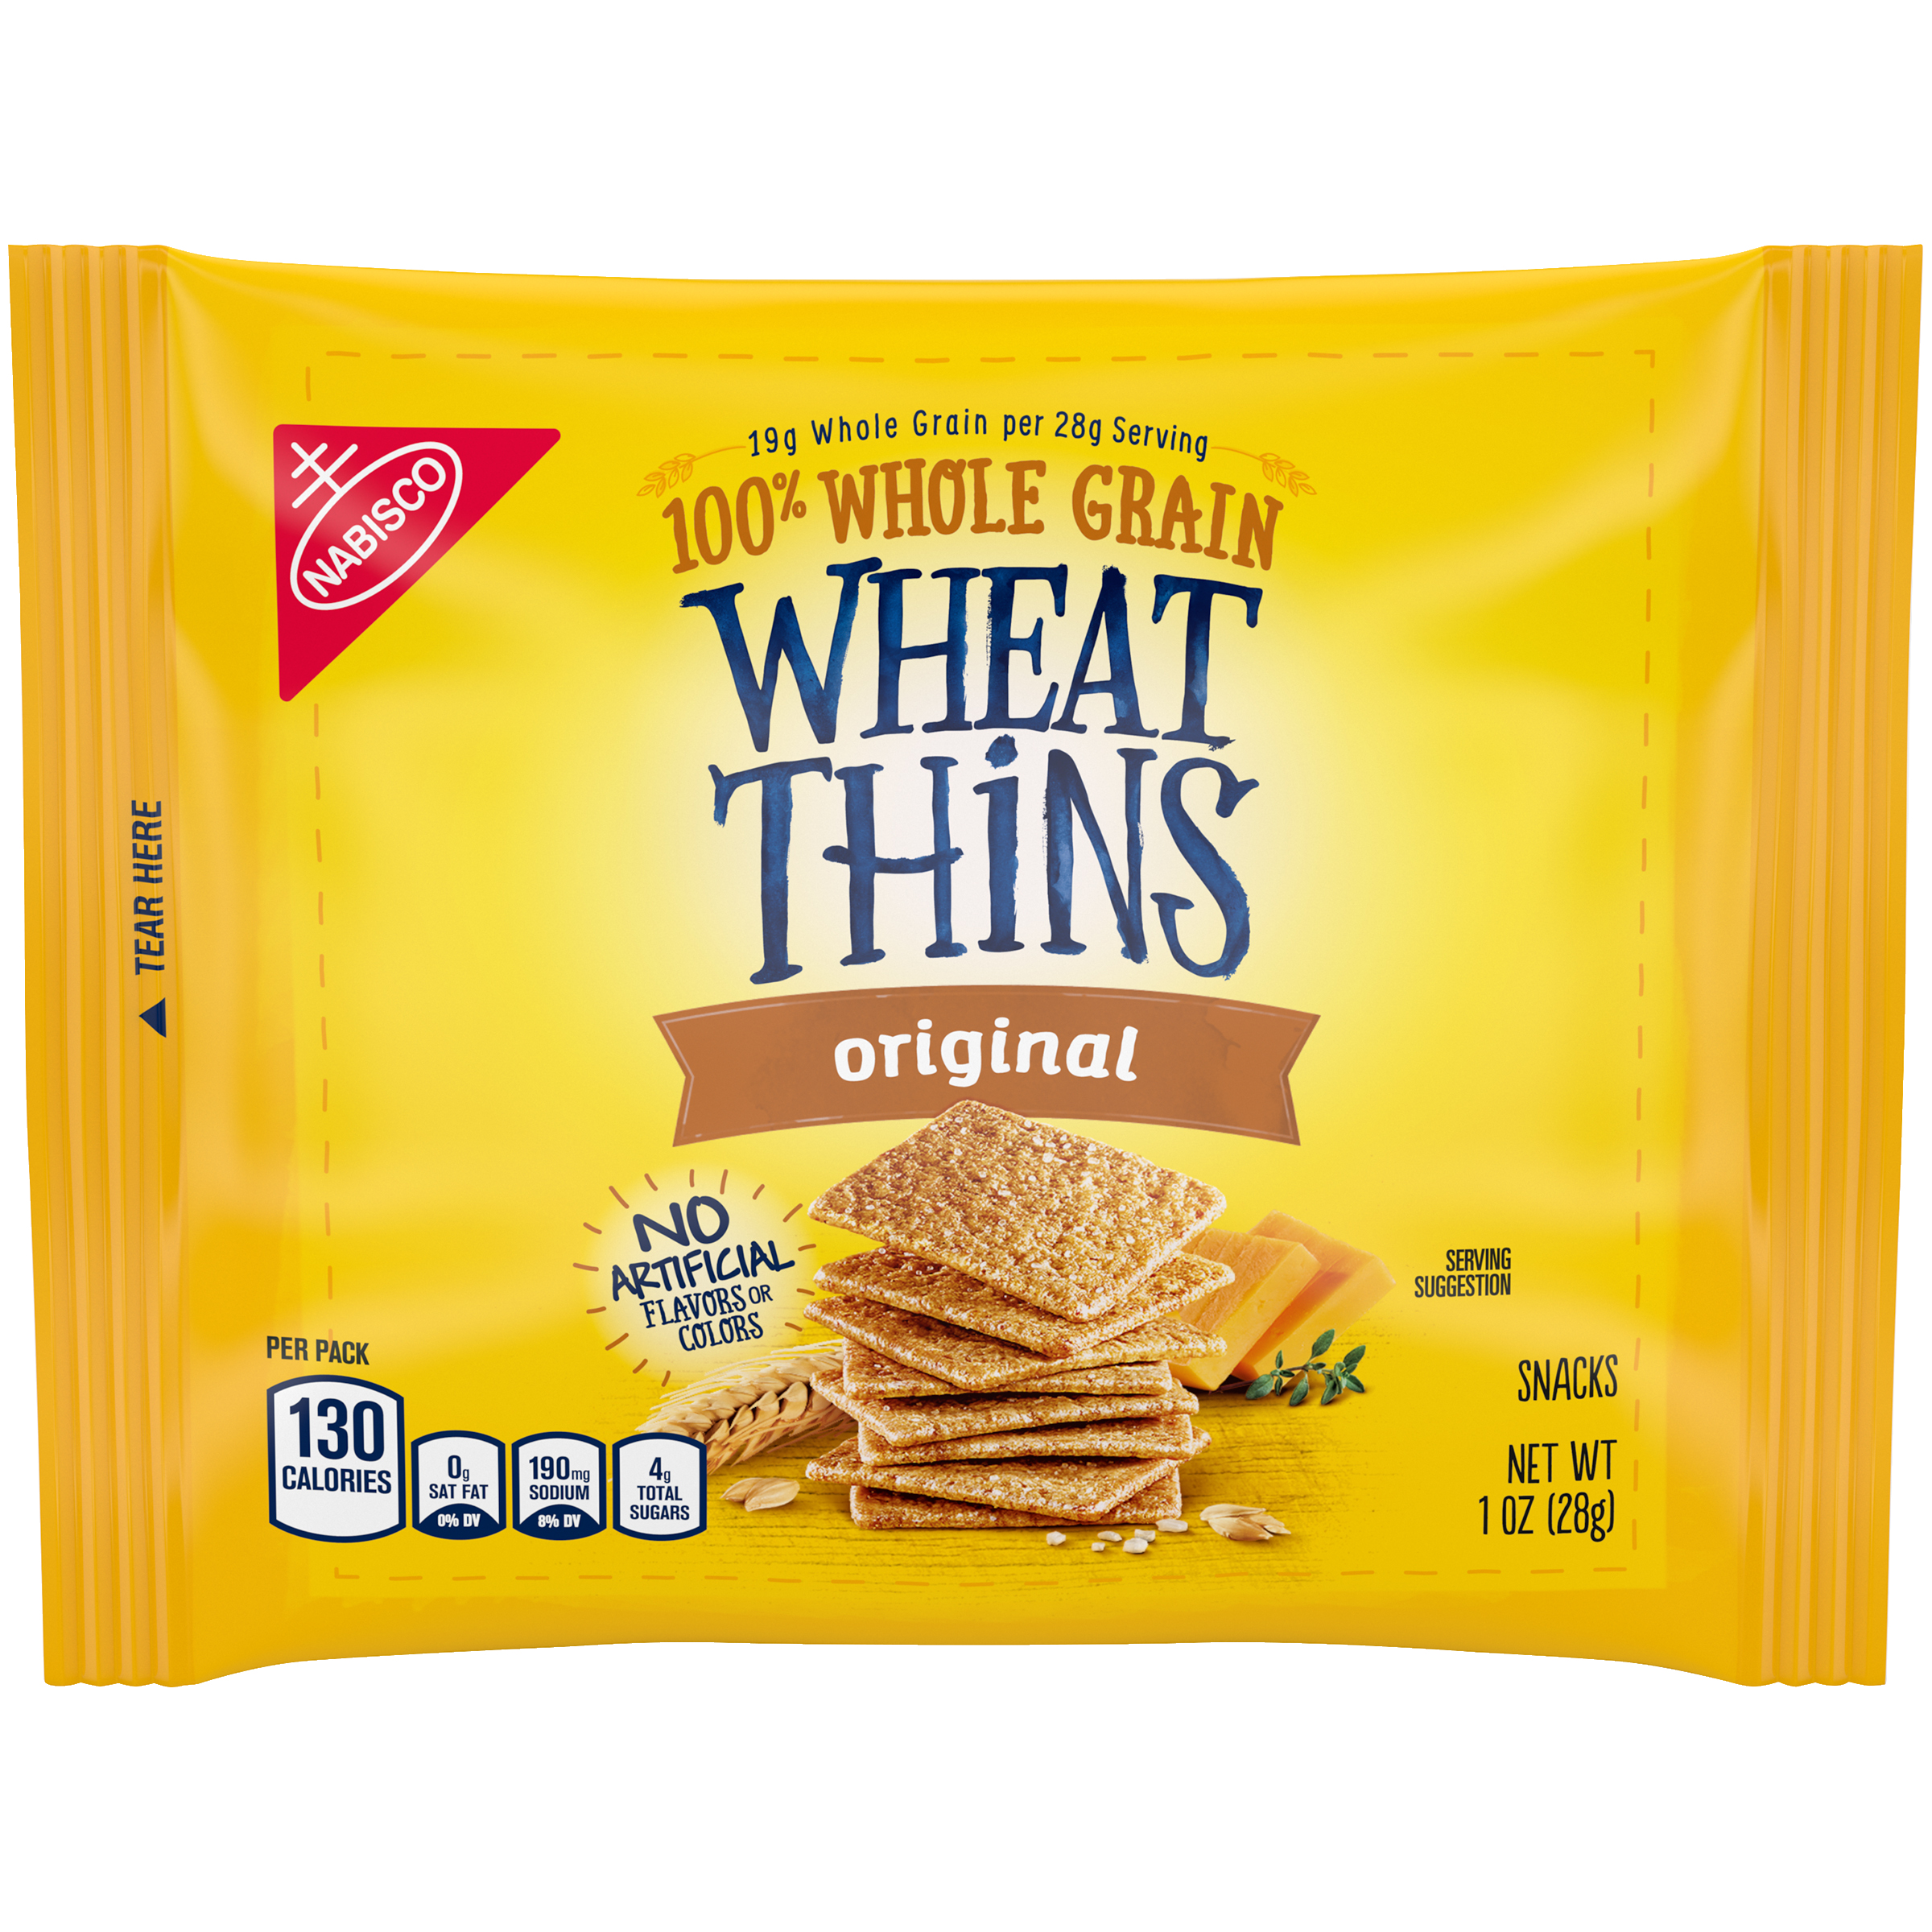 Wheat Thins Original Whole Grain Wheat Crackers, 1 oz Snack Pack-0